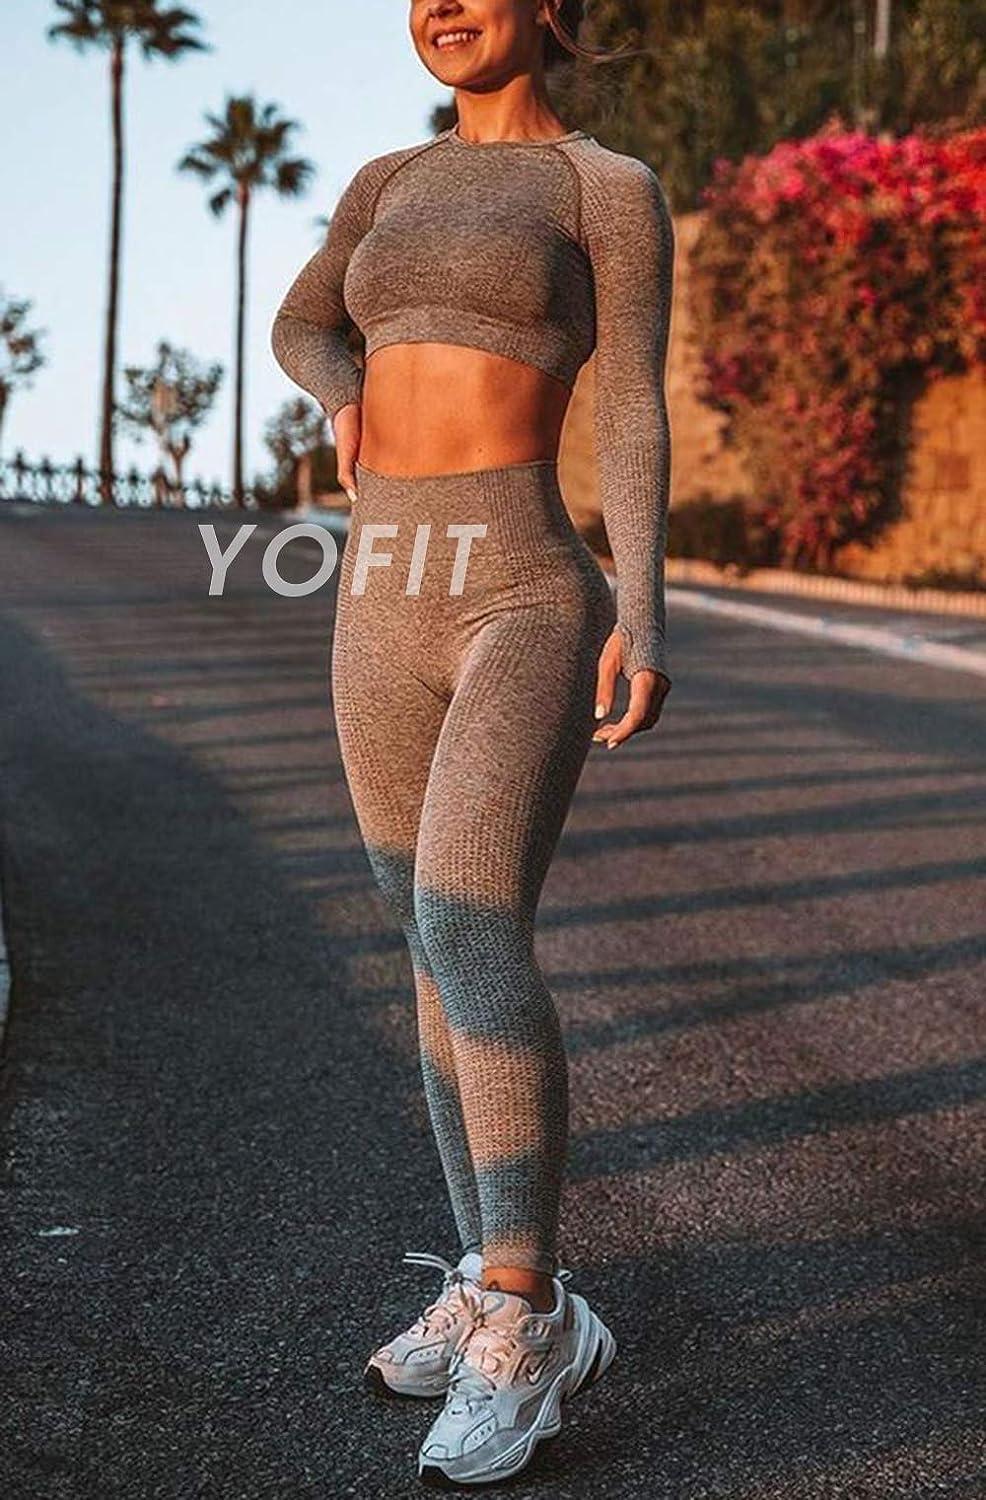 Buy Women Seamless Activewear 2 Pieces Set Leggings Crop Top Yoga Gym  Workout Outfit (White, M) at